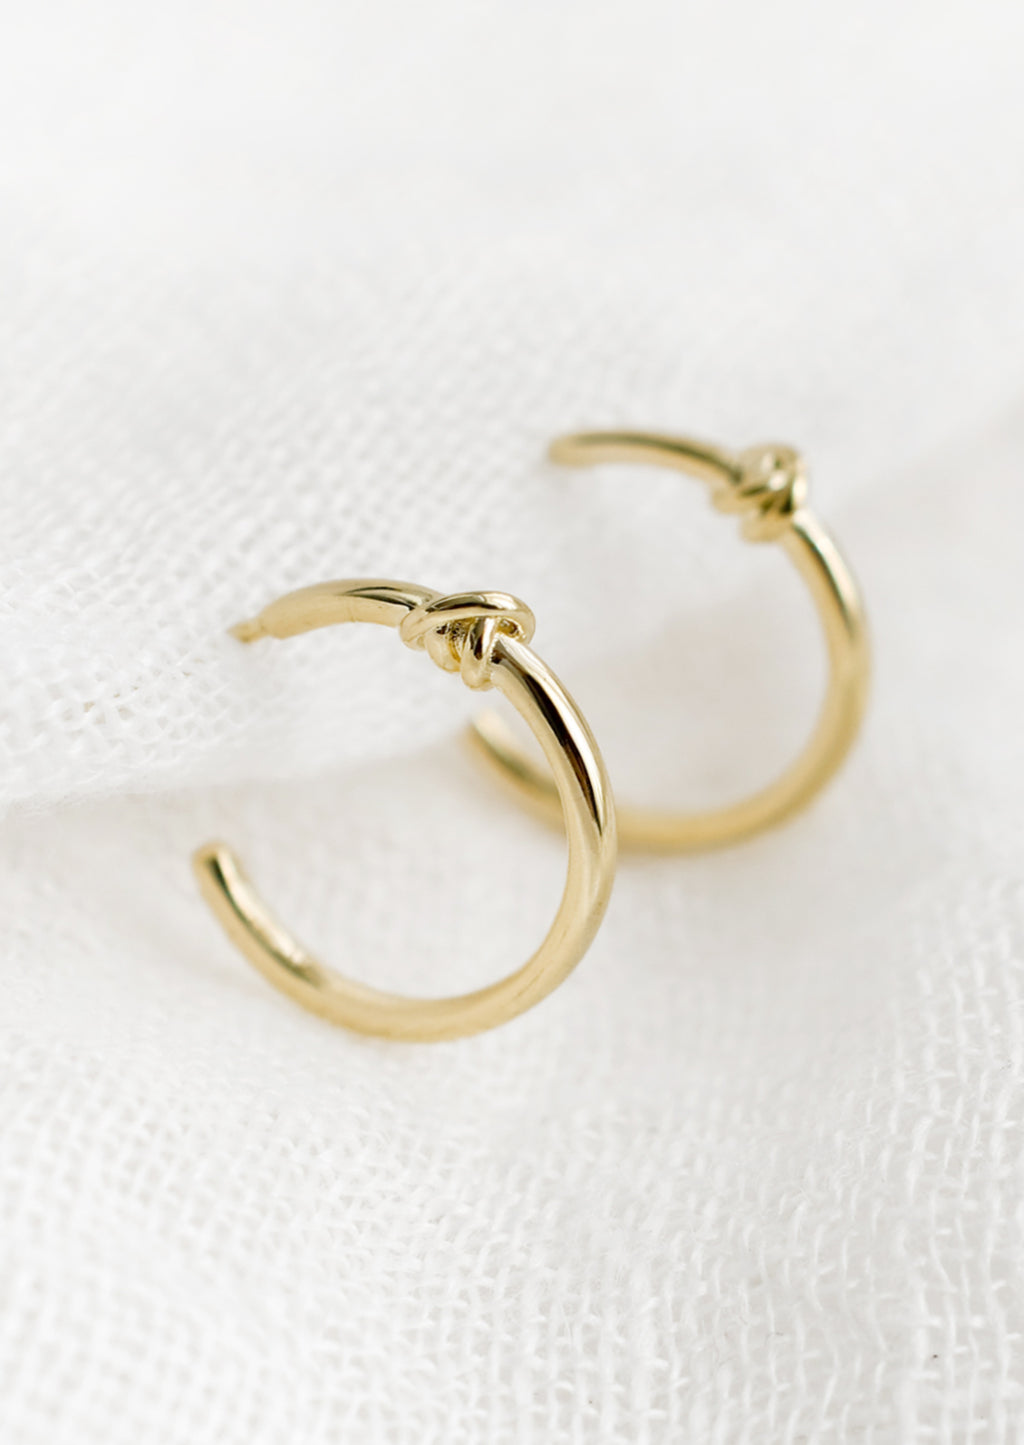 2: A pair of gold hoop earrings with single knot detail at top.